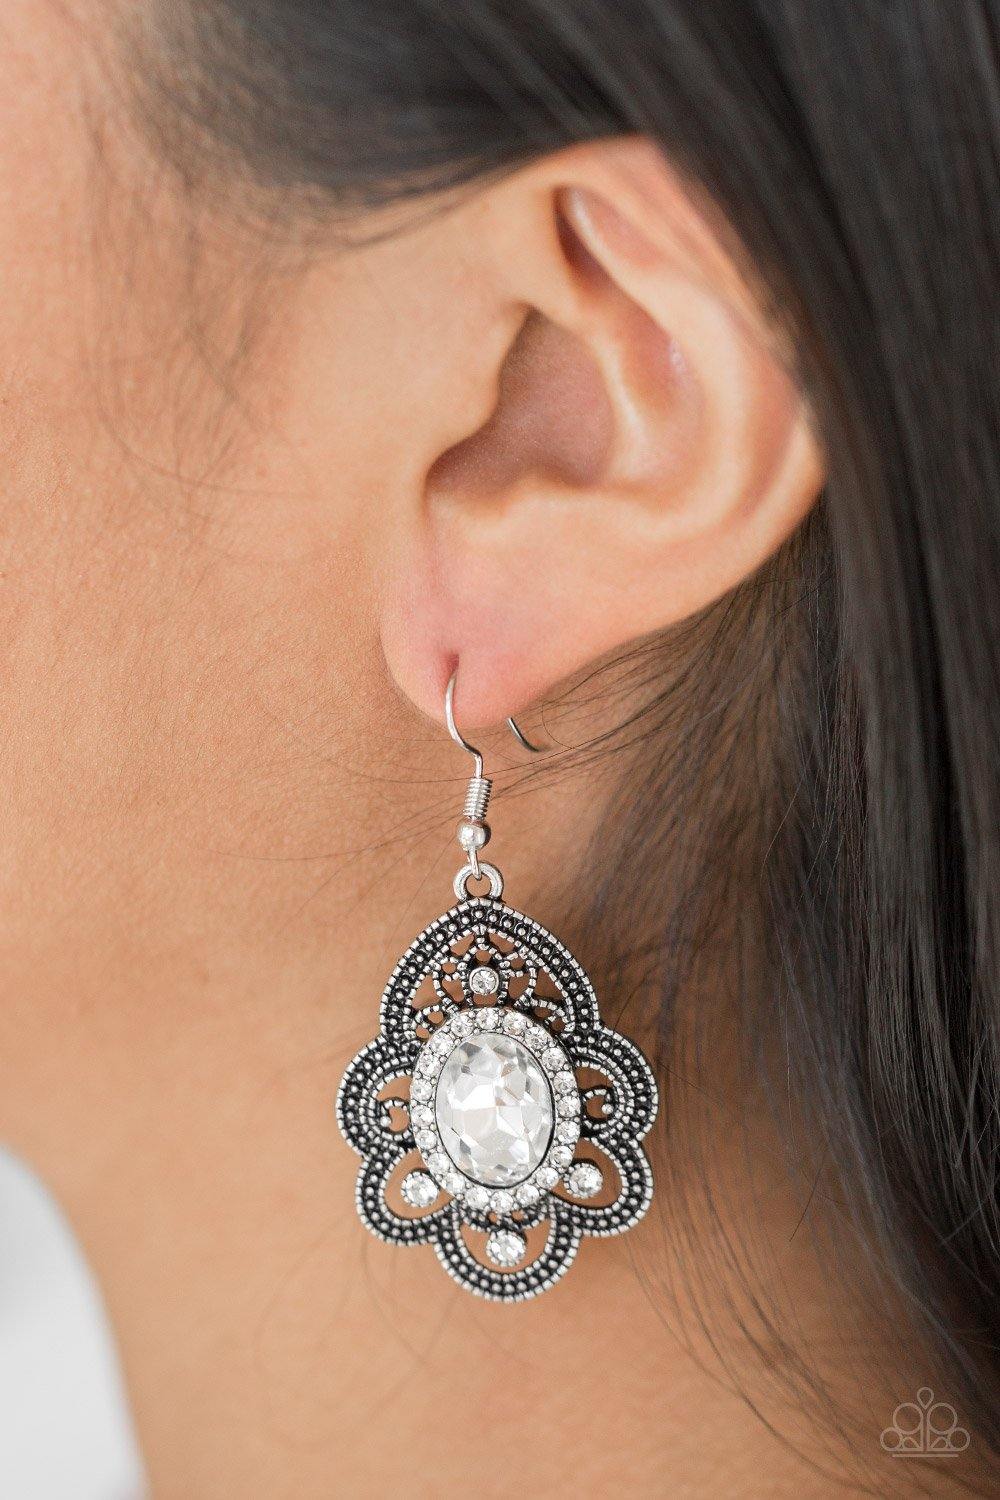 Reign Supreme - White Earrings - Paparazzi Accessories - Sassysblingandthings